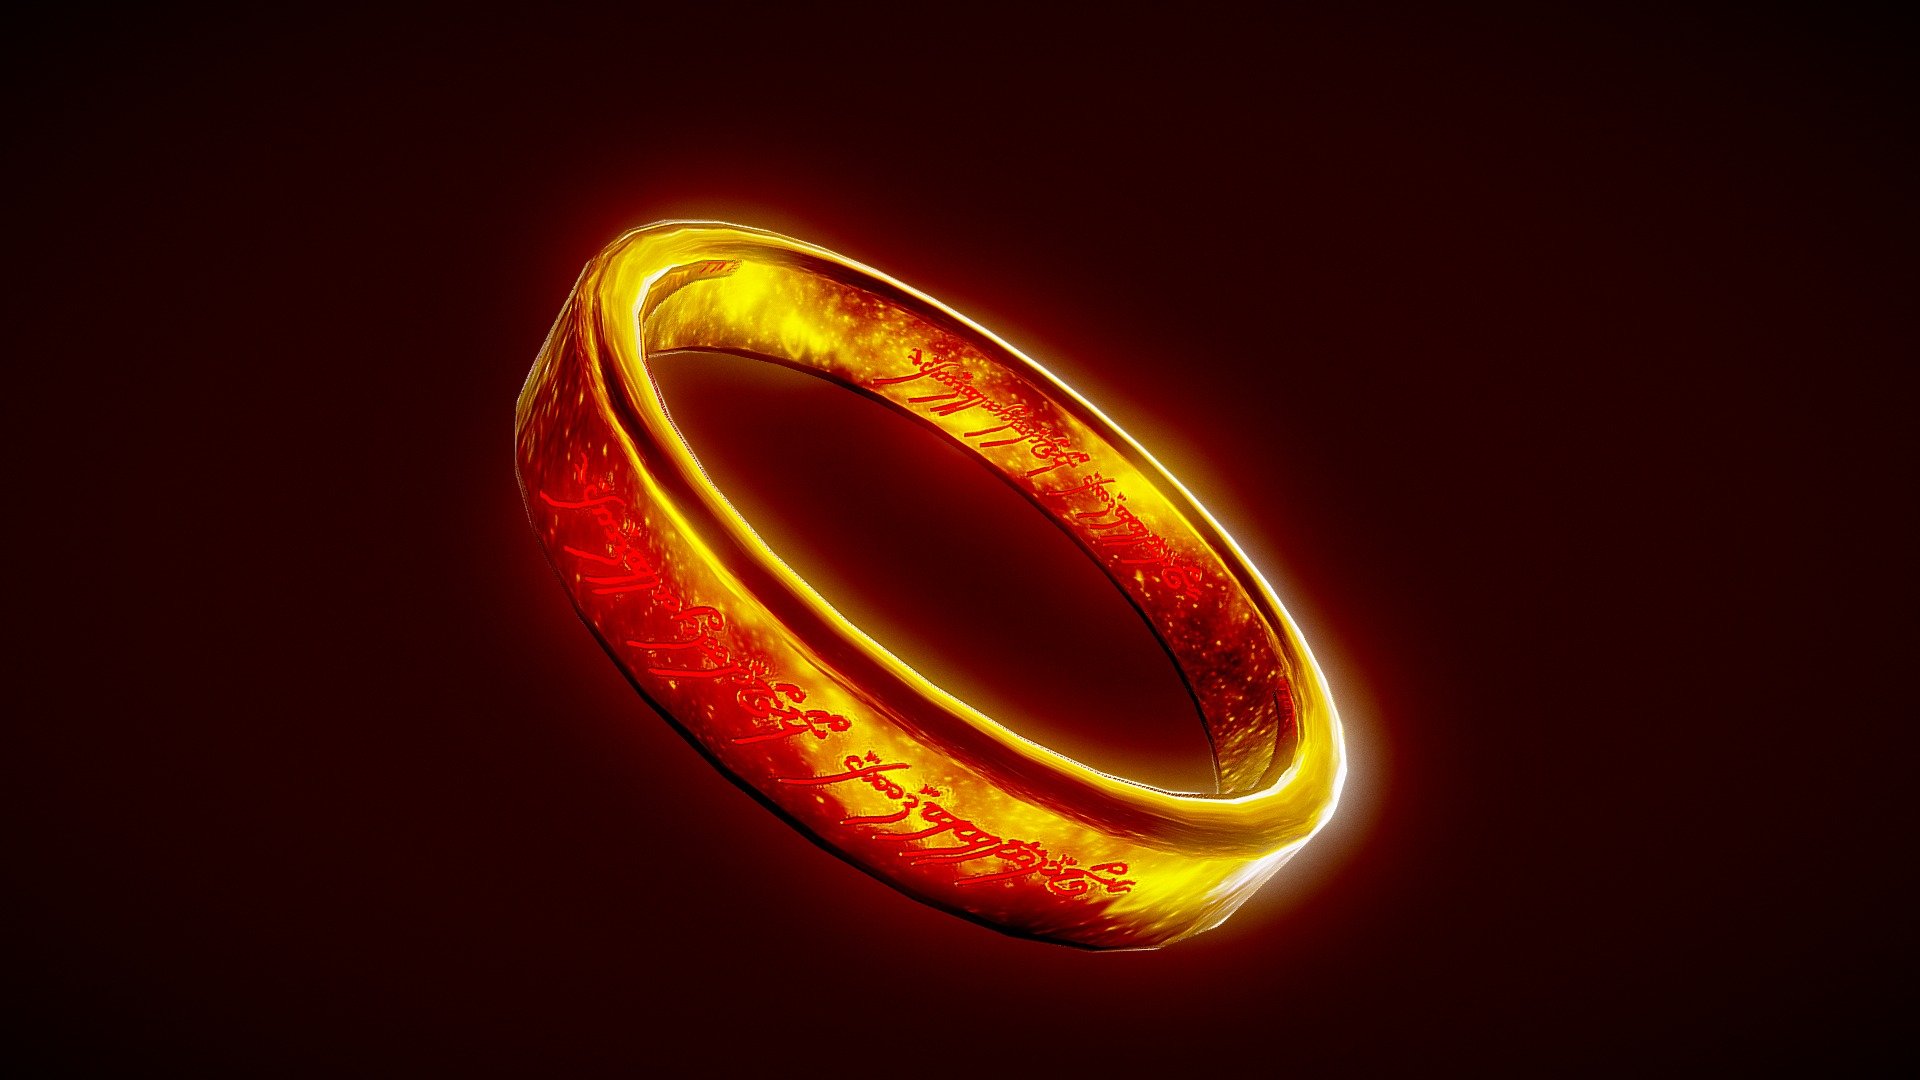 Lord Of The Rings Ring Wiki The One Ring (lord Of The Rings) - The Art ...